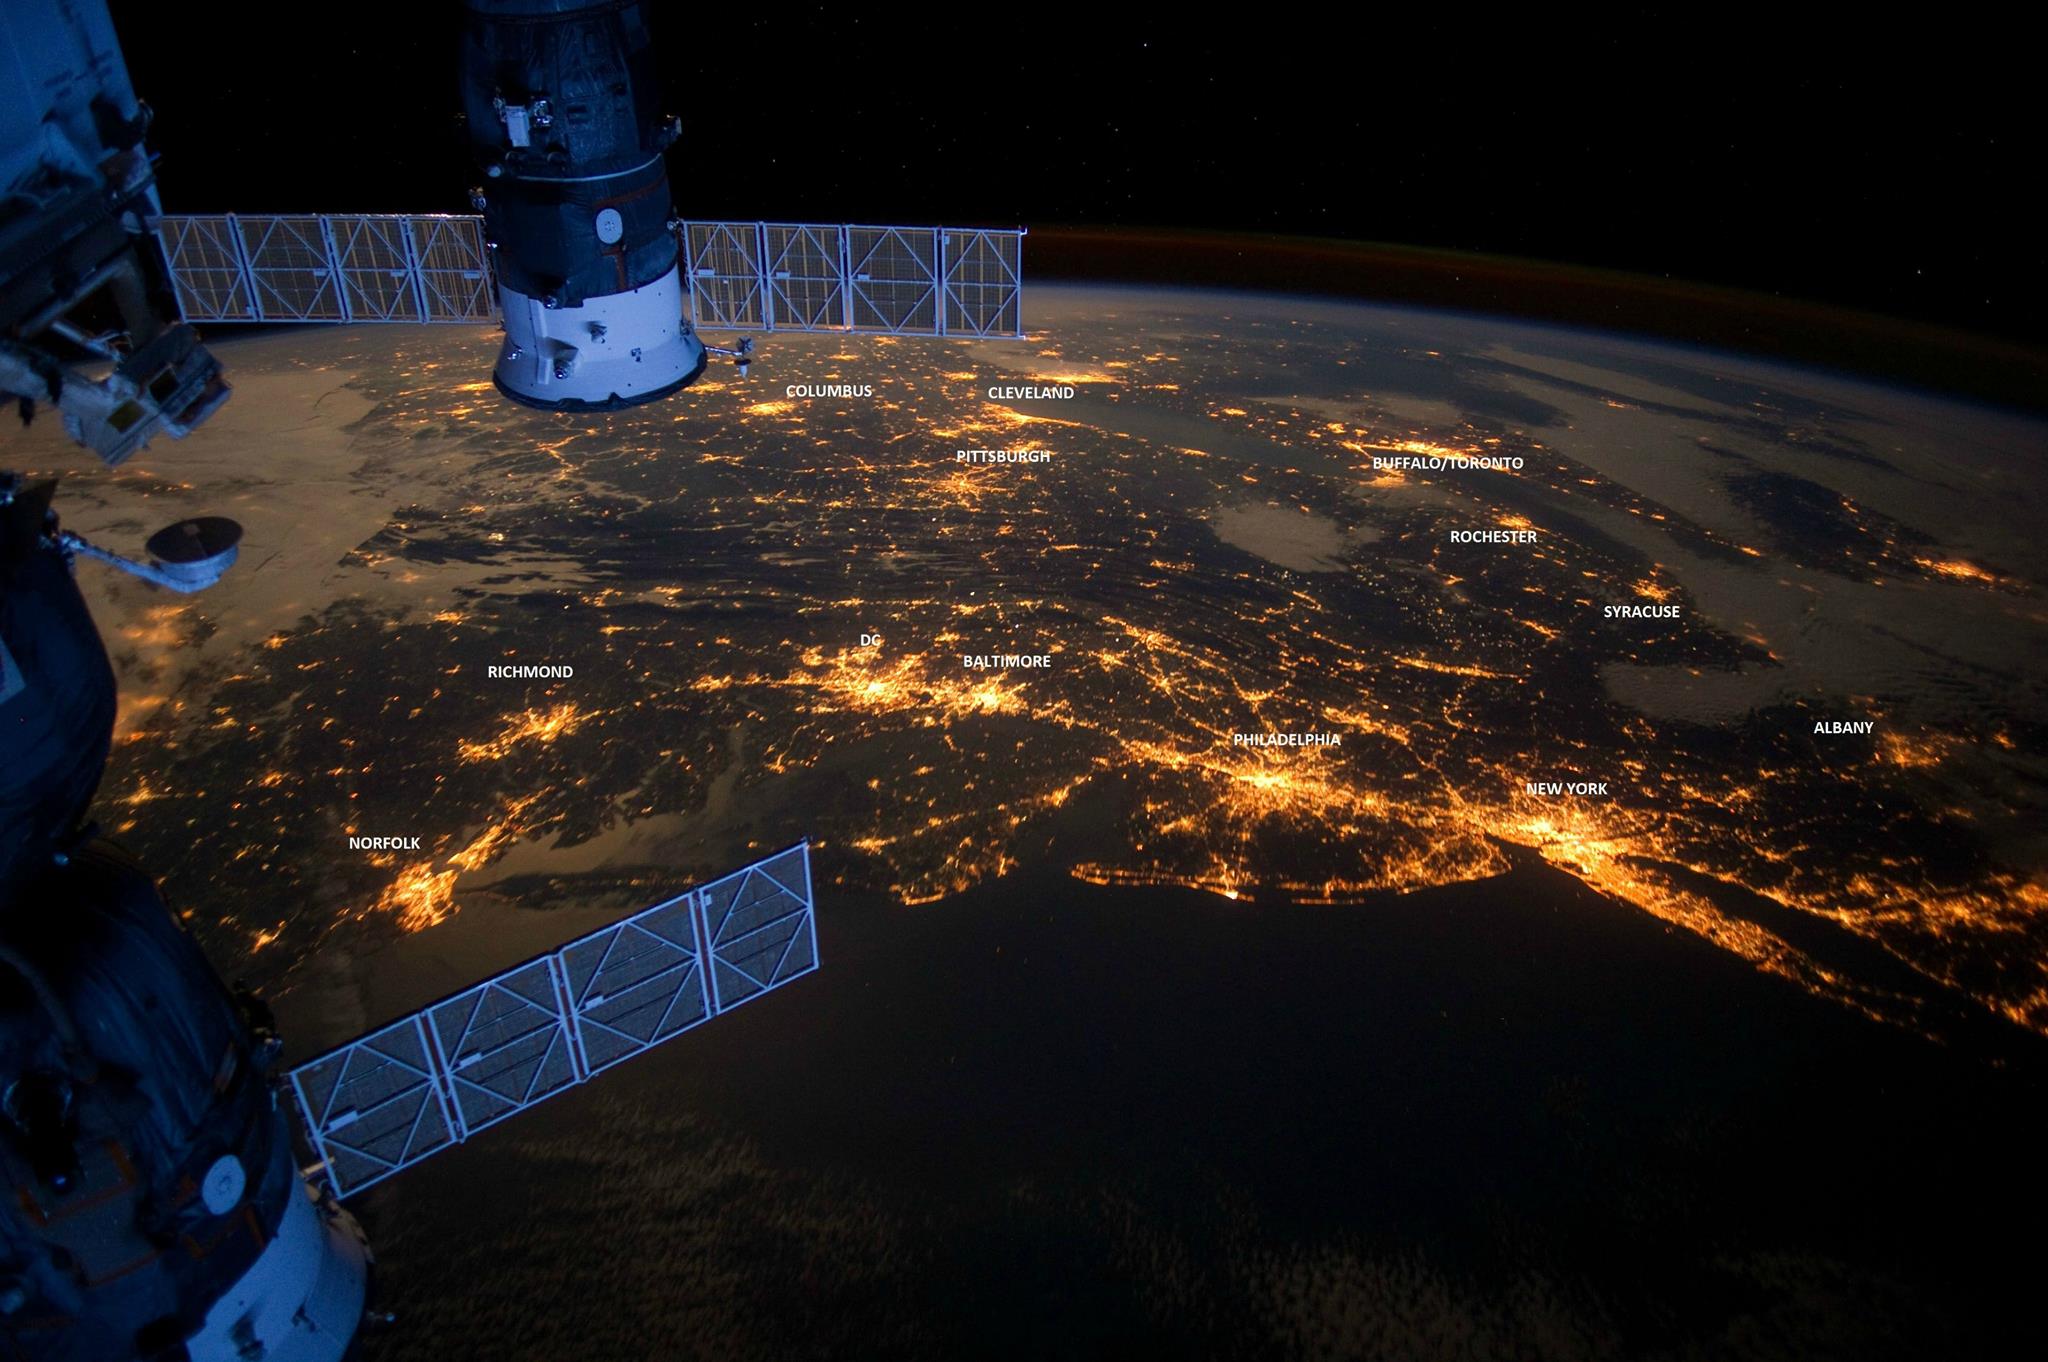 The U.S. Mid-Atlantic Coast at night from the International Space Station.